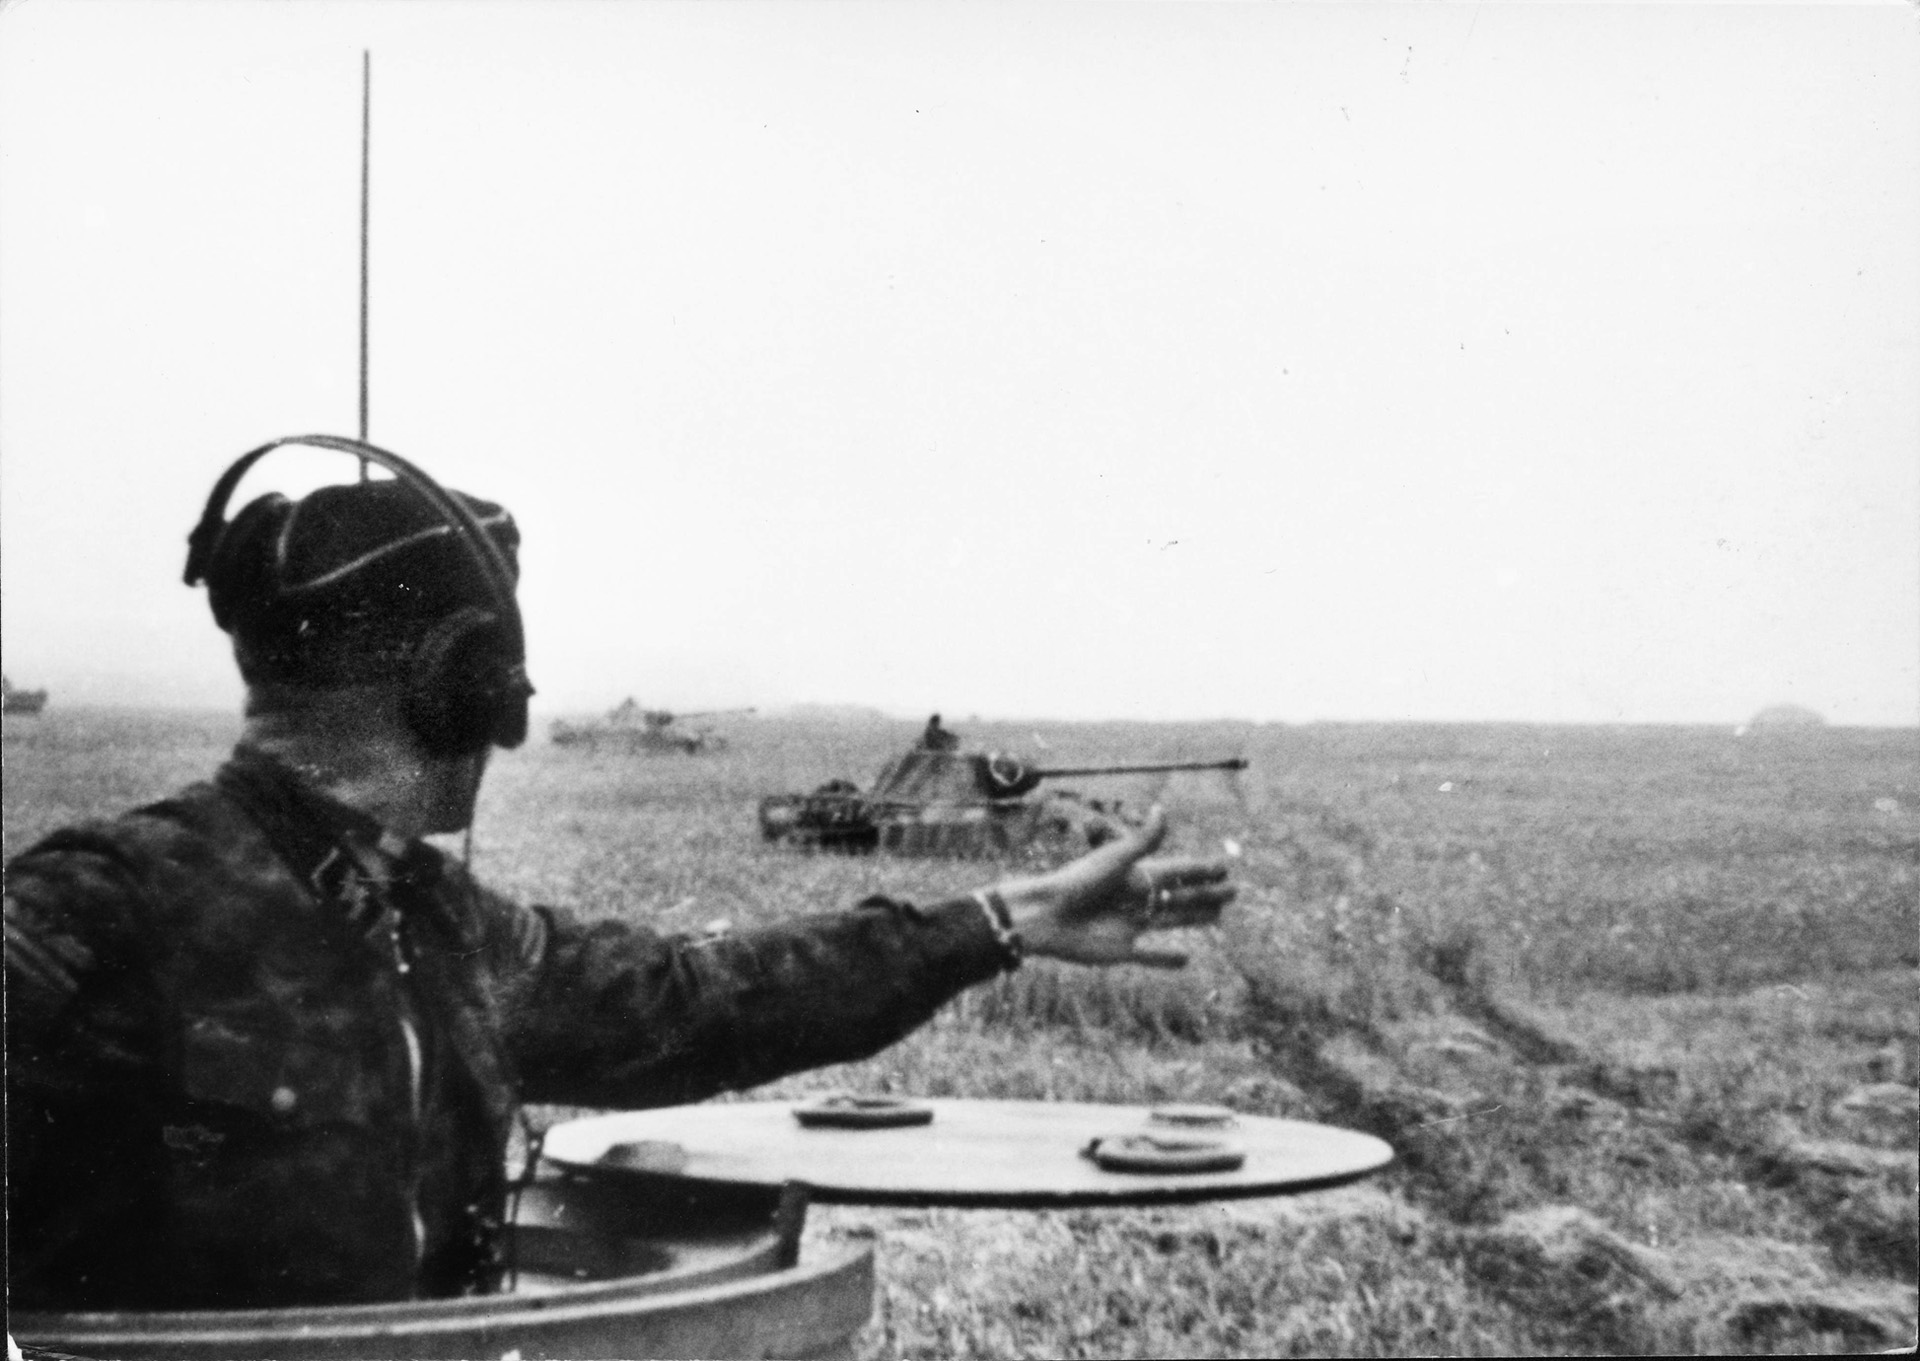 A German SS tank commander signals to another tank on his left during the advance toward the showdown with Soviet tanks at Kursk. The tank in the distance appears to be a PzKpfw. V Panther, which first appeared in significant numbers at Kursk and experienced mechanical problems.